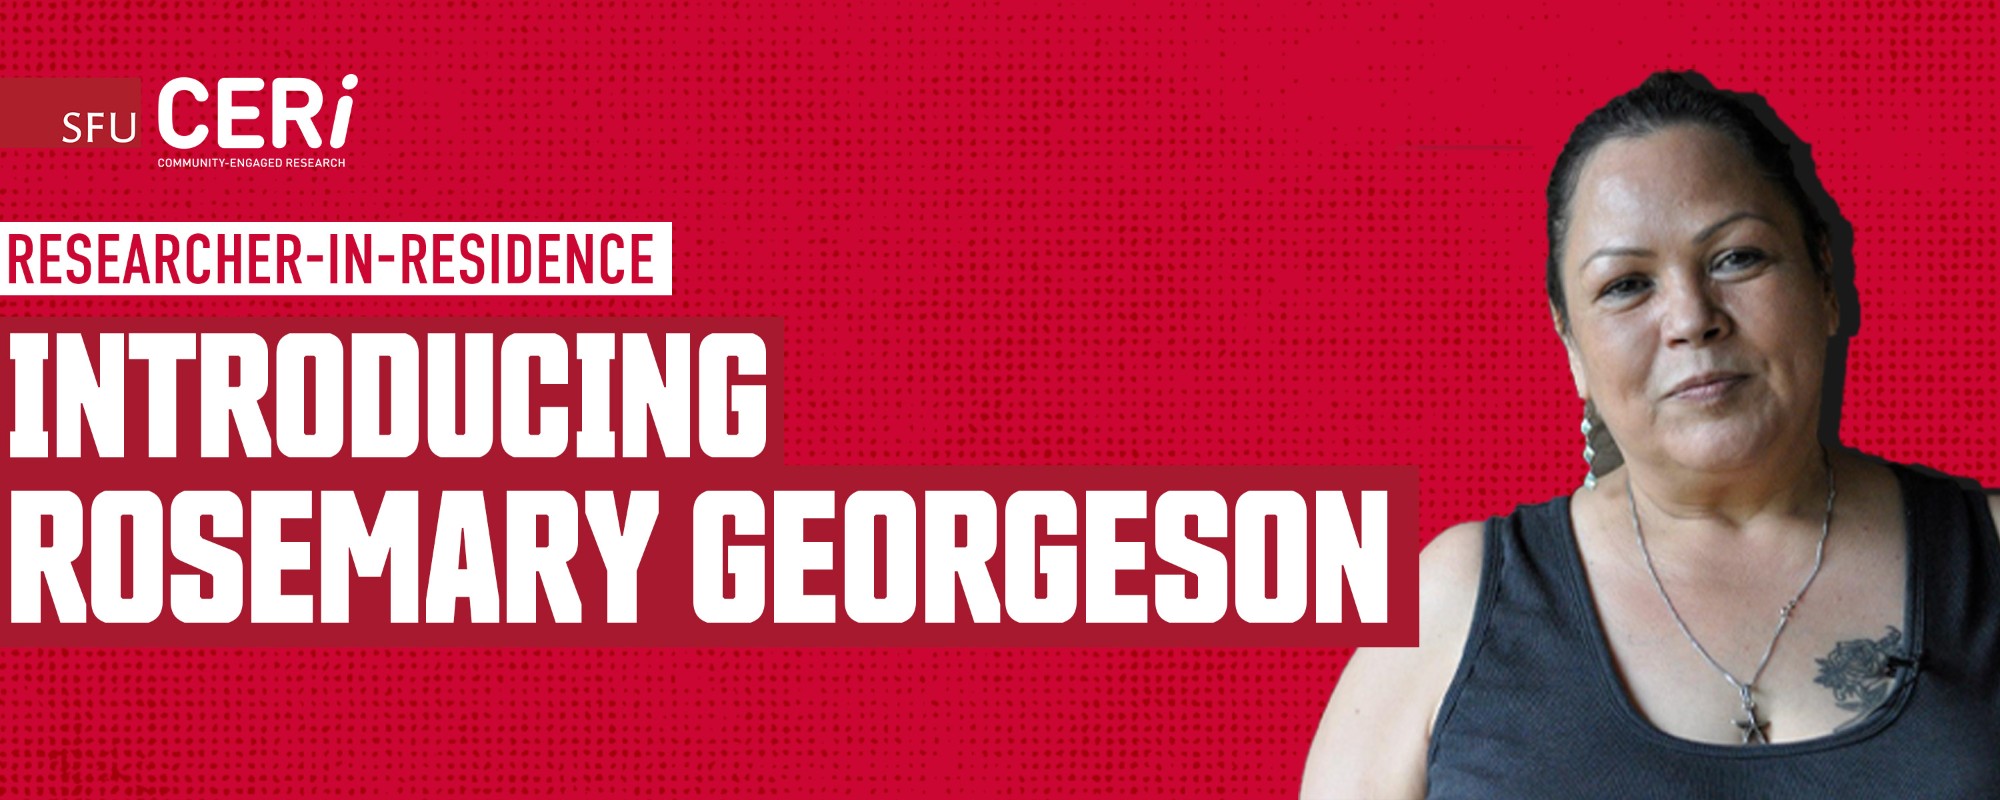 Introducing Rosemary Georgeson, CERi Researcher-in-Residence